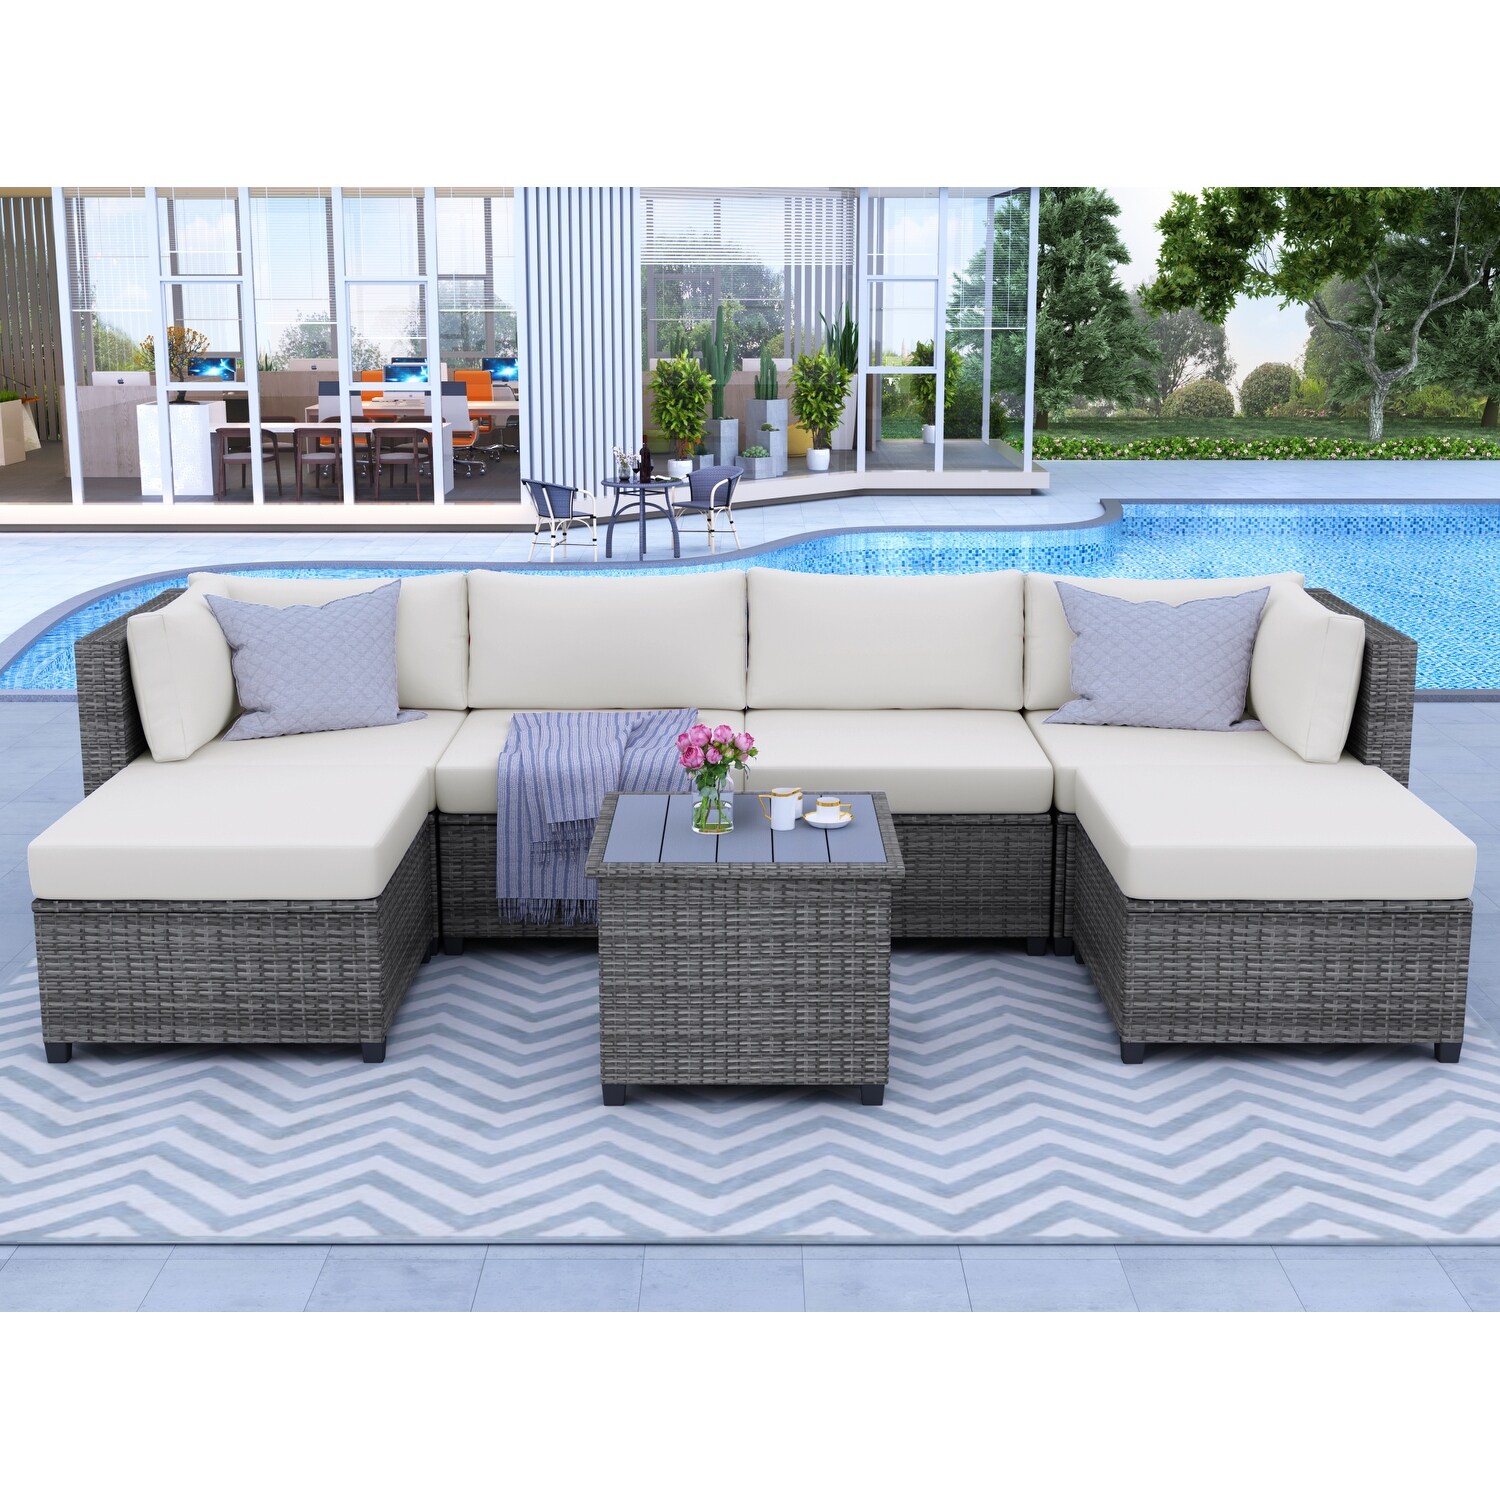 7 Piece Outdoor Ratten Sofa Set  Sectional Seating Group W/cushions